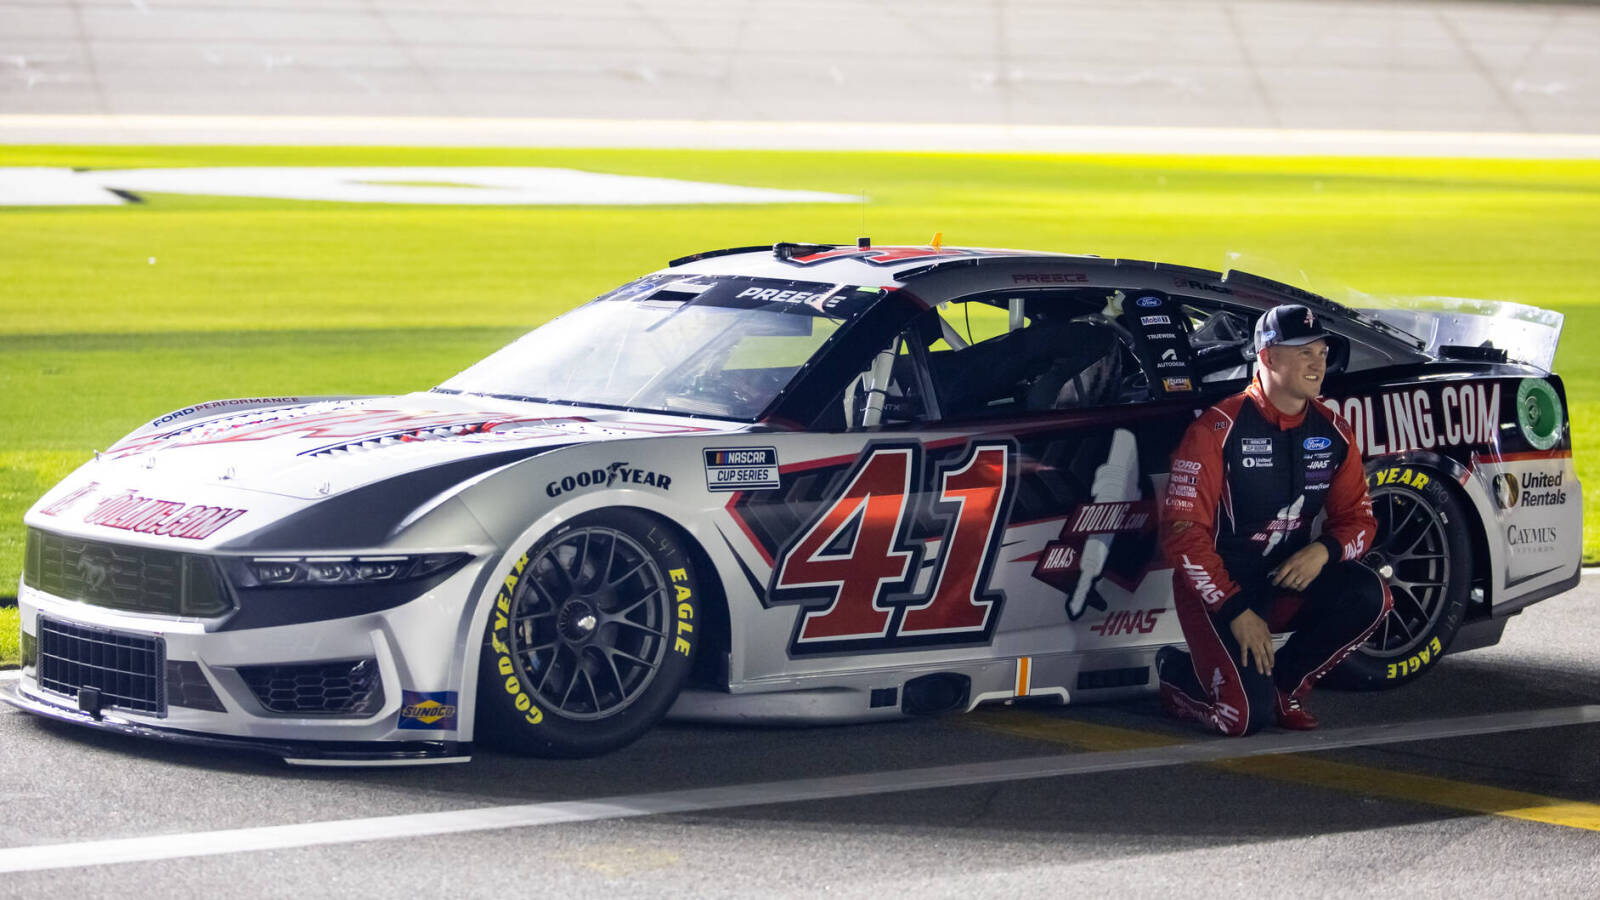 Two Stewart-Haas Racing teams penalized before cars even hit the track at Atlanta